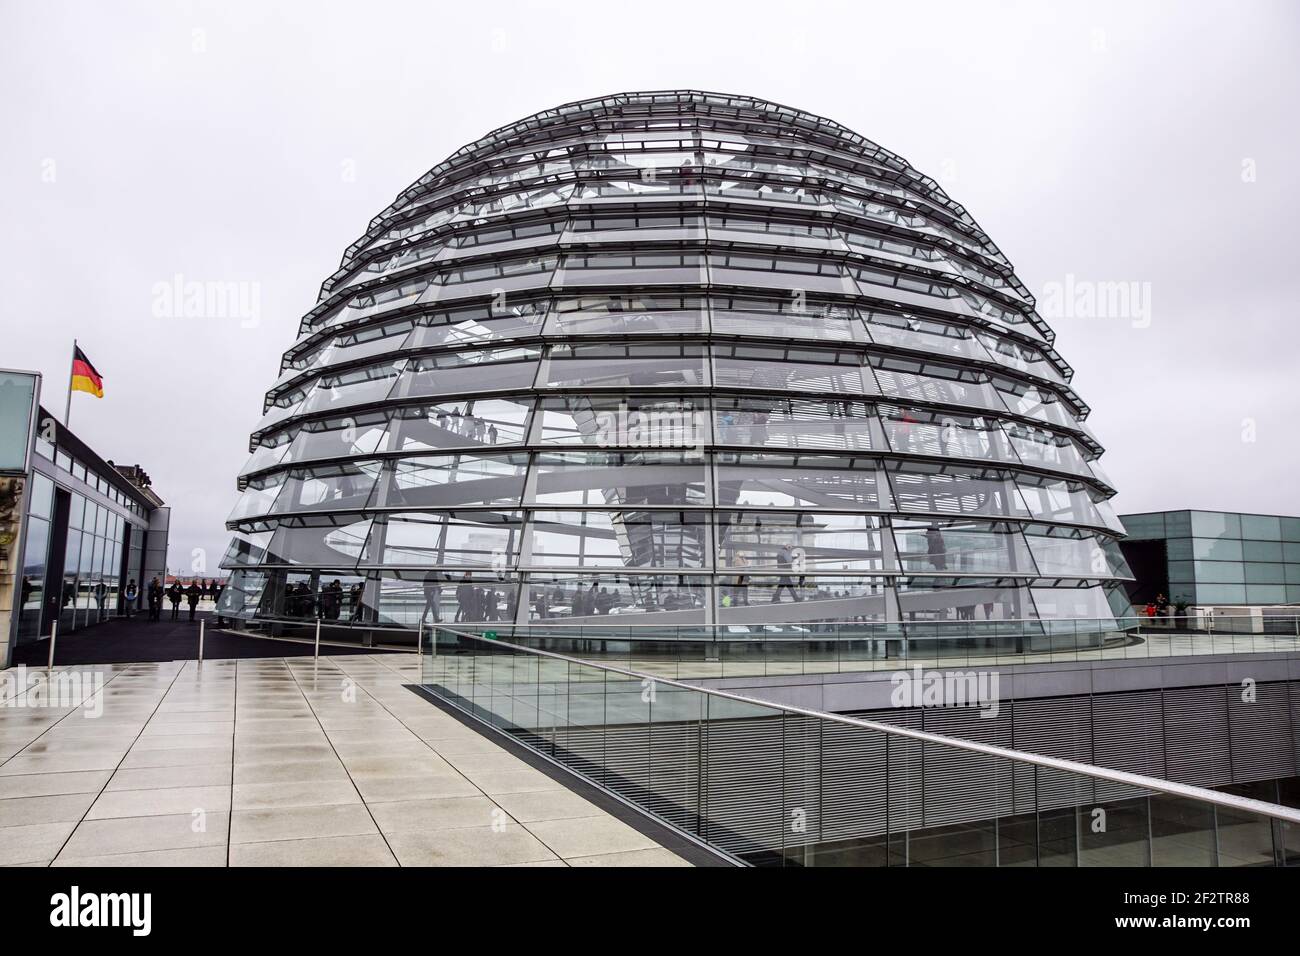 The Cupola on top of the Reichstag building in Berlin. Winter view Stock Photo